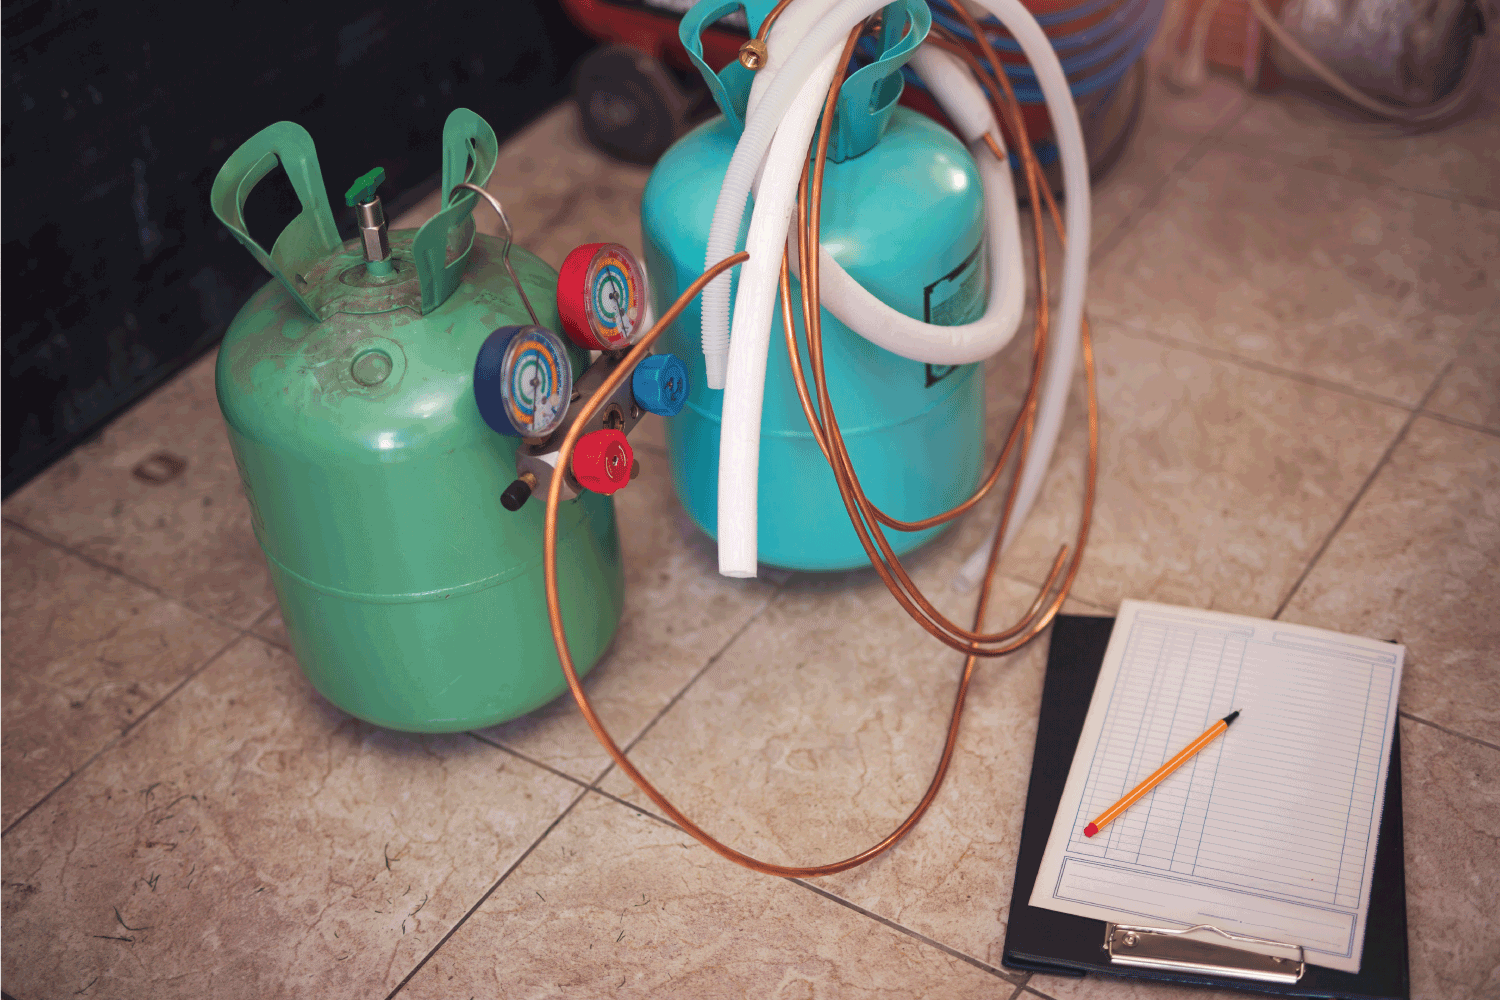 Freon gas cylinders with pressure meter. Workshop for replacement of freons in air conditioners